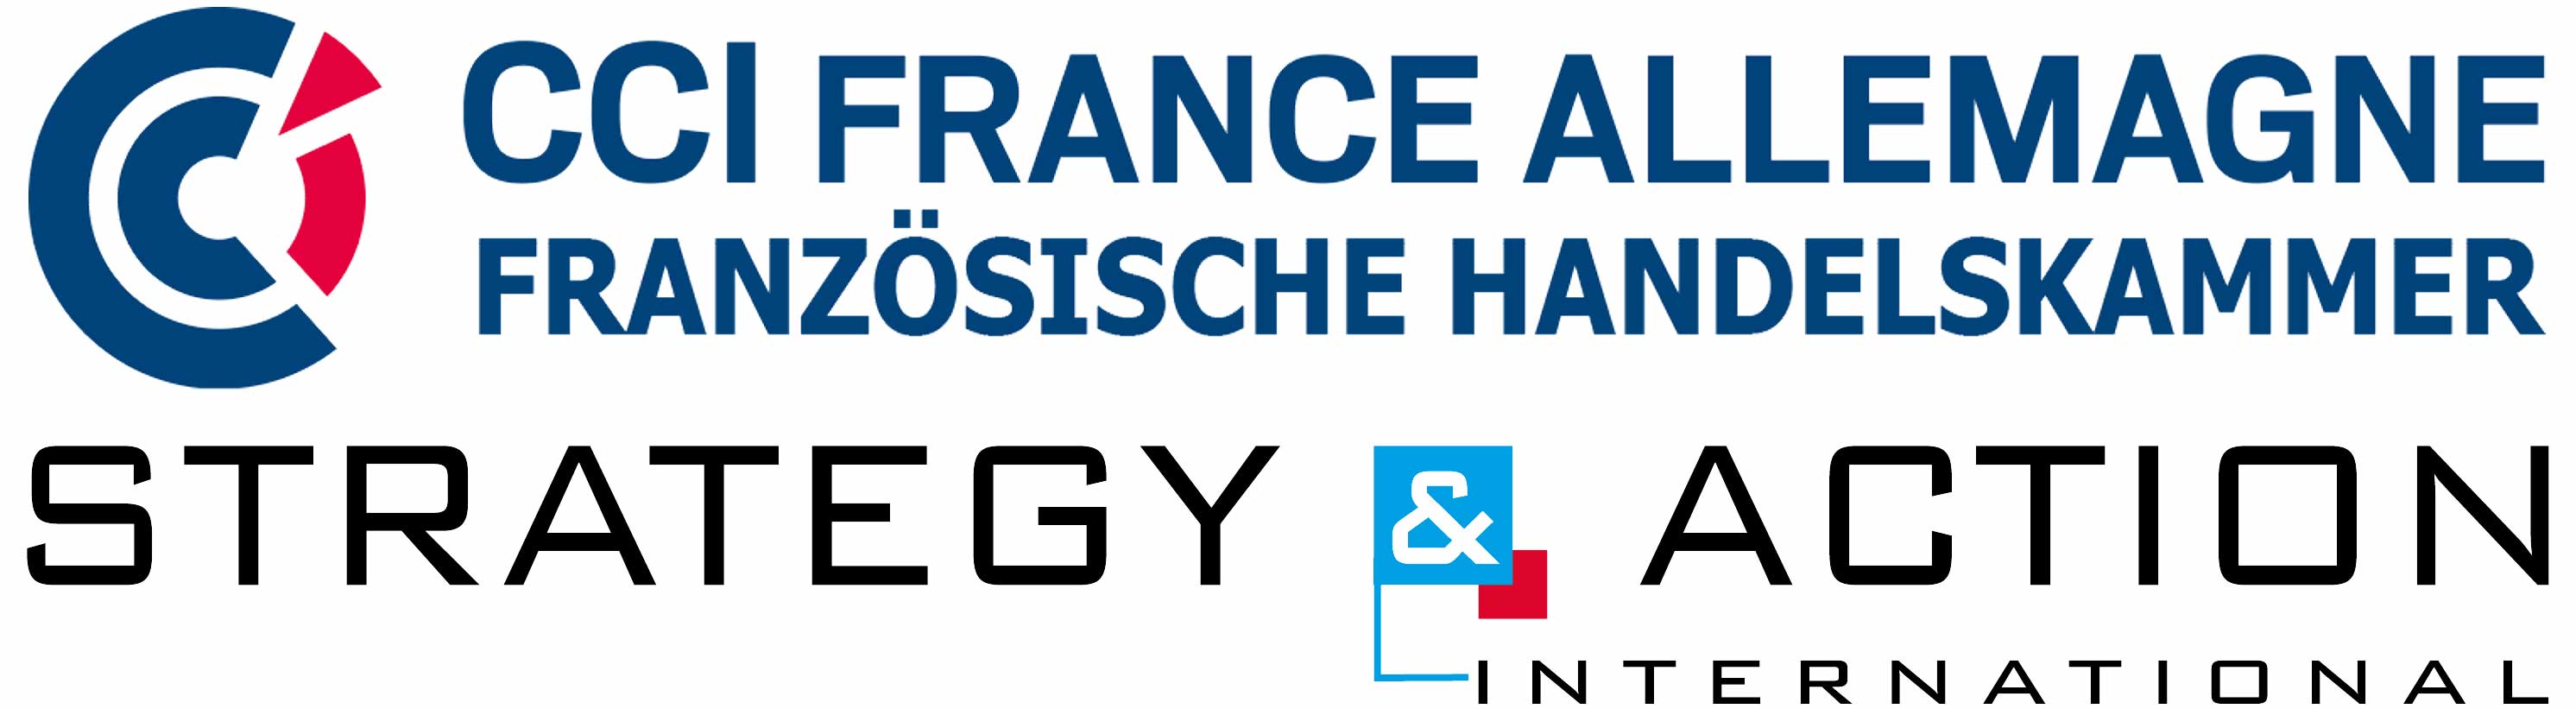 Logo CCI FRANCE ALLEMAGNE / Strategy & Action International GmbH